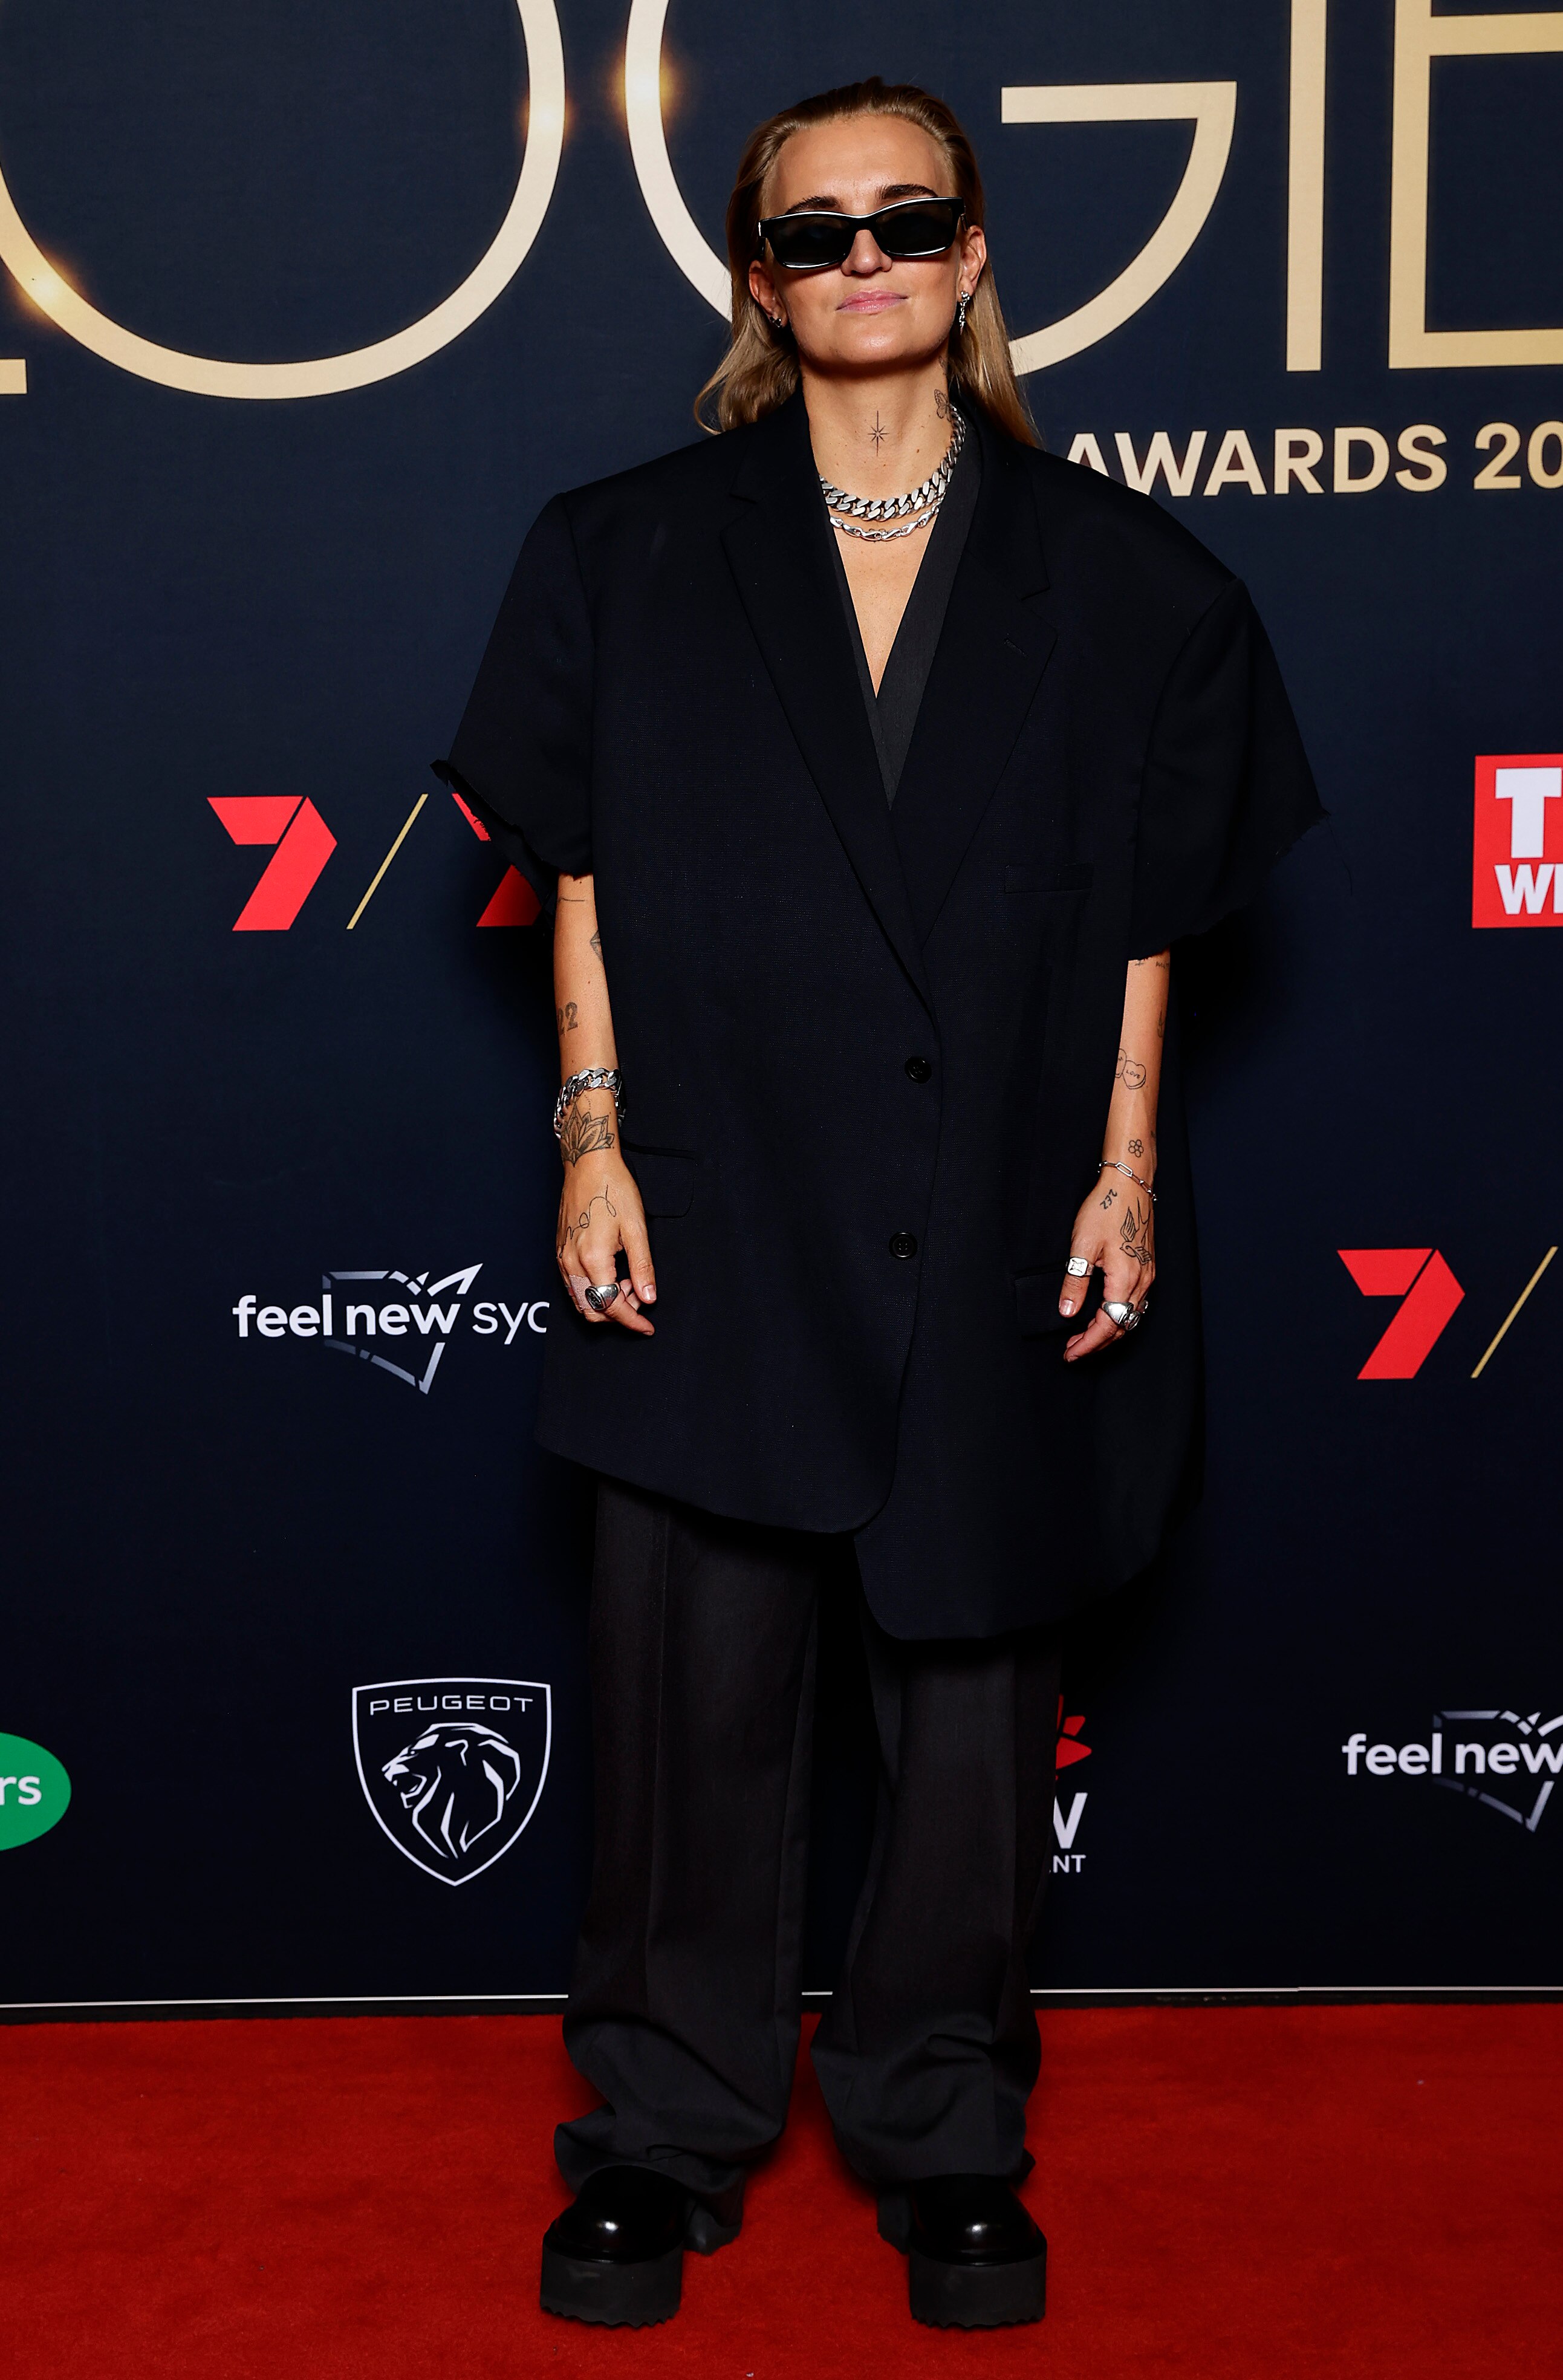 A female musician in a black pants-suit and black shoes with sunglasses on the red carpet